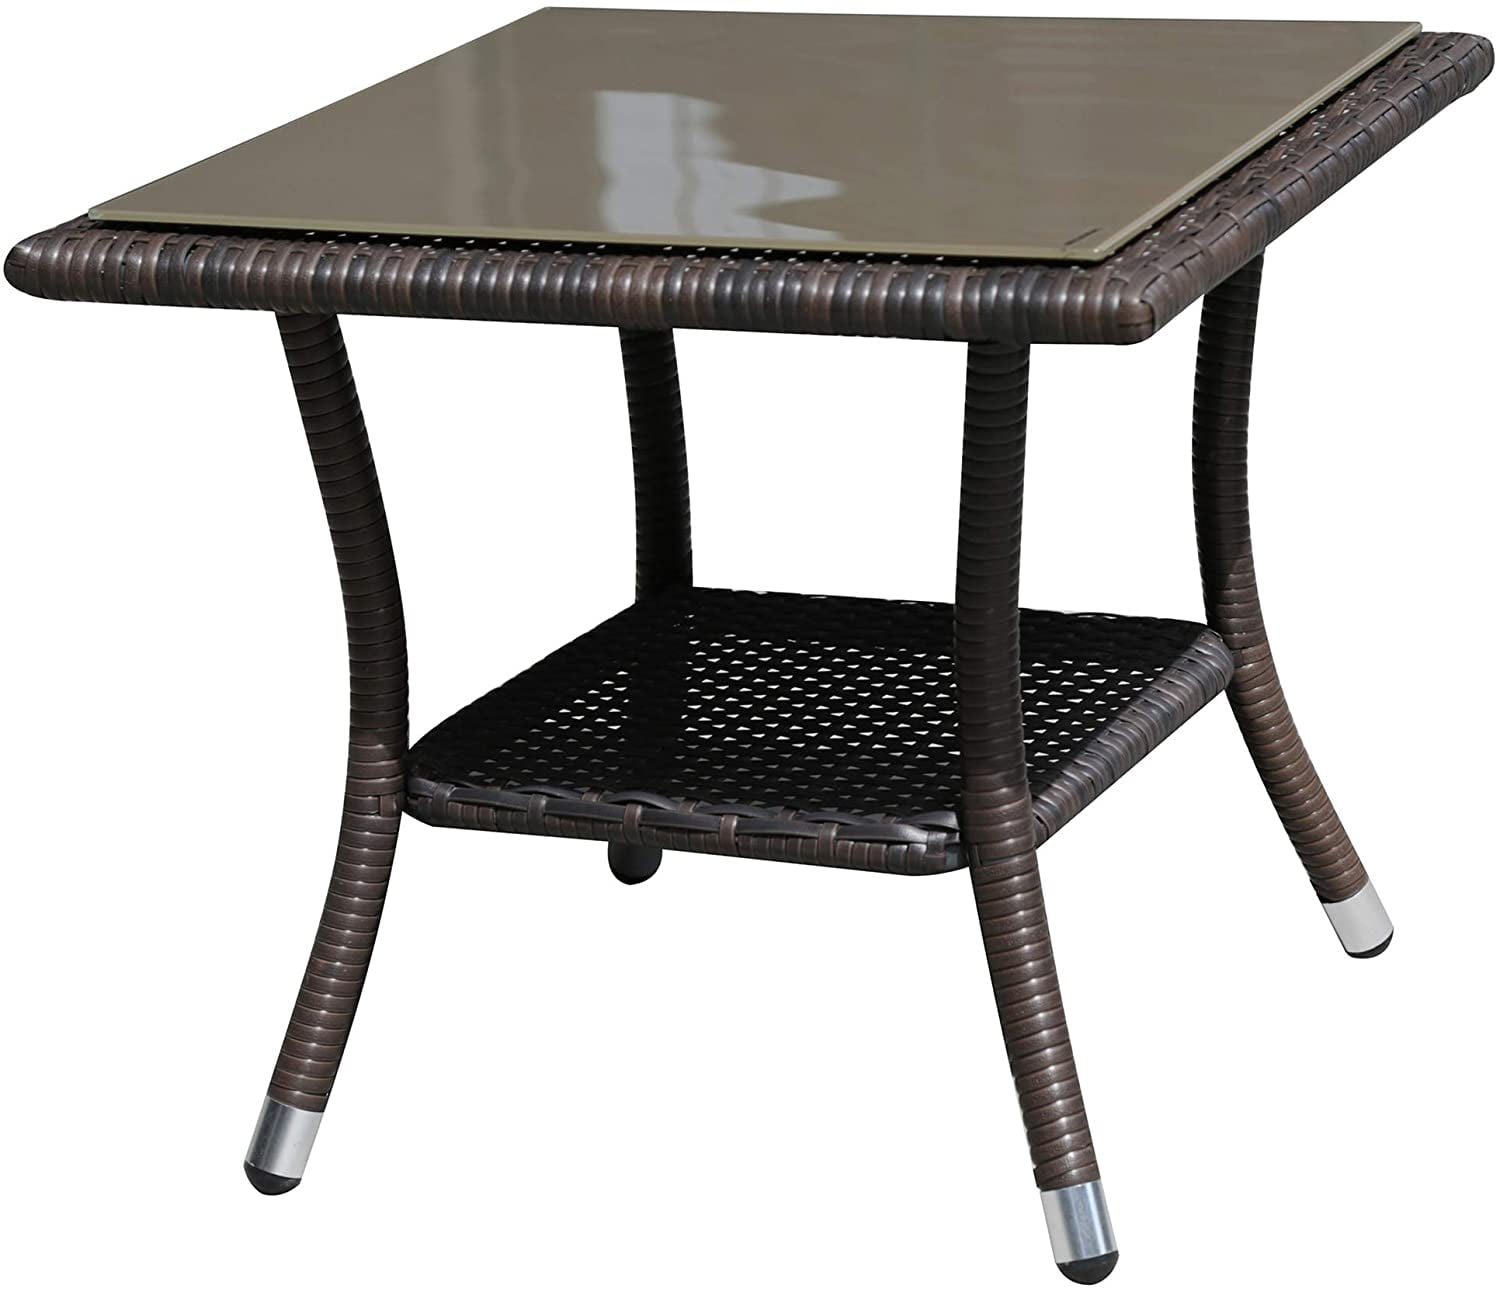 VALITA Outdoor Wicker Glass Top Side Table Patio Rattan Square End Table with Storage Black 